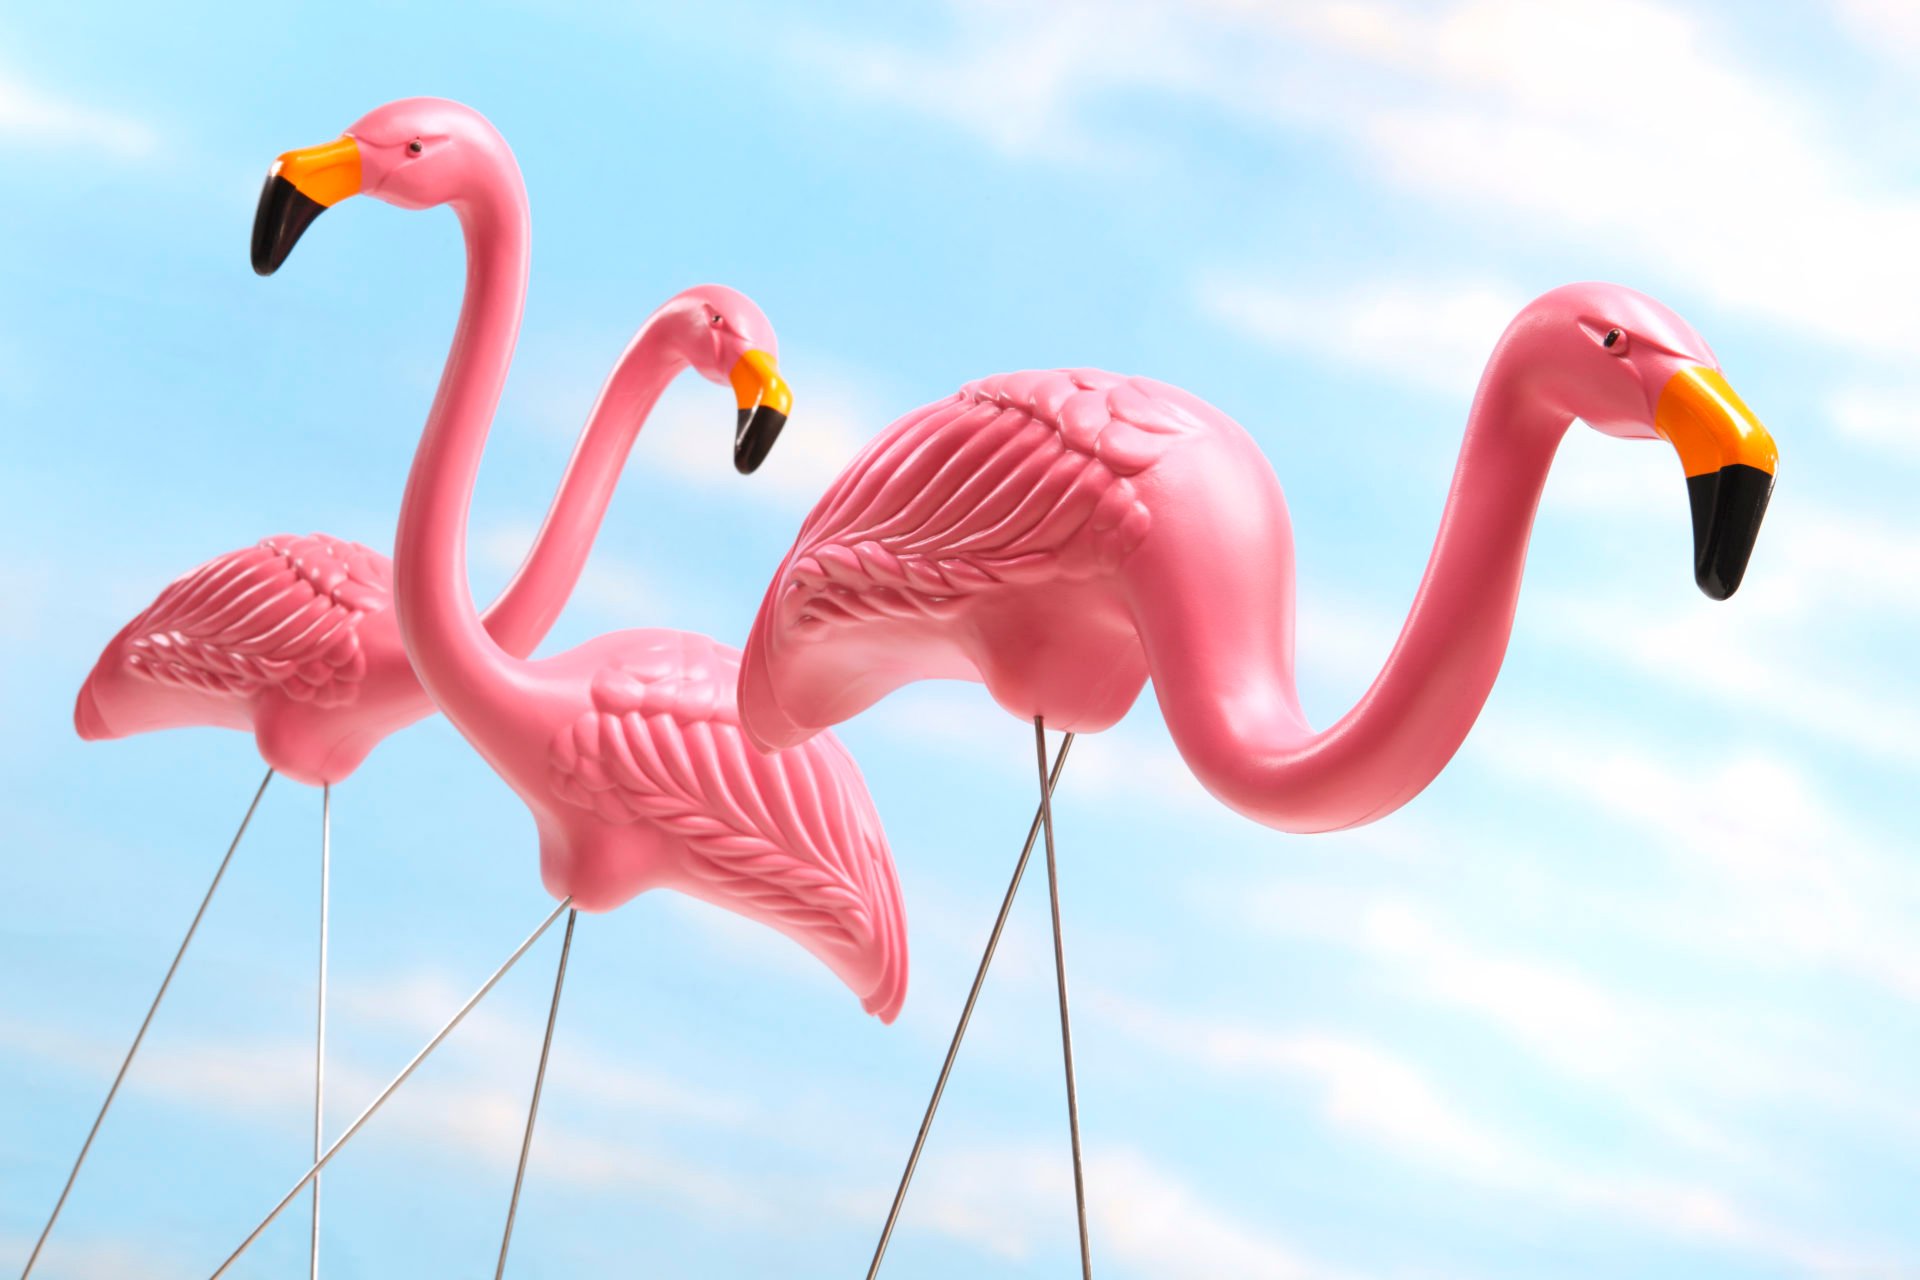 Three pink plastic lawn flamingos against blue sky background